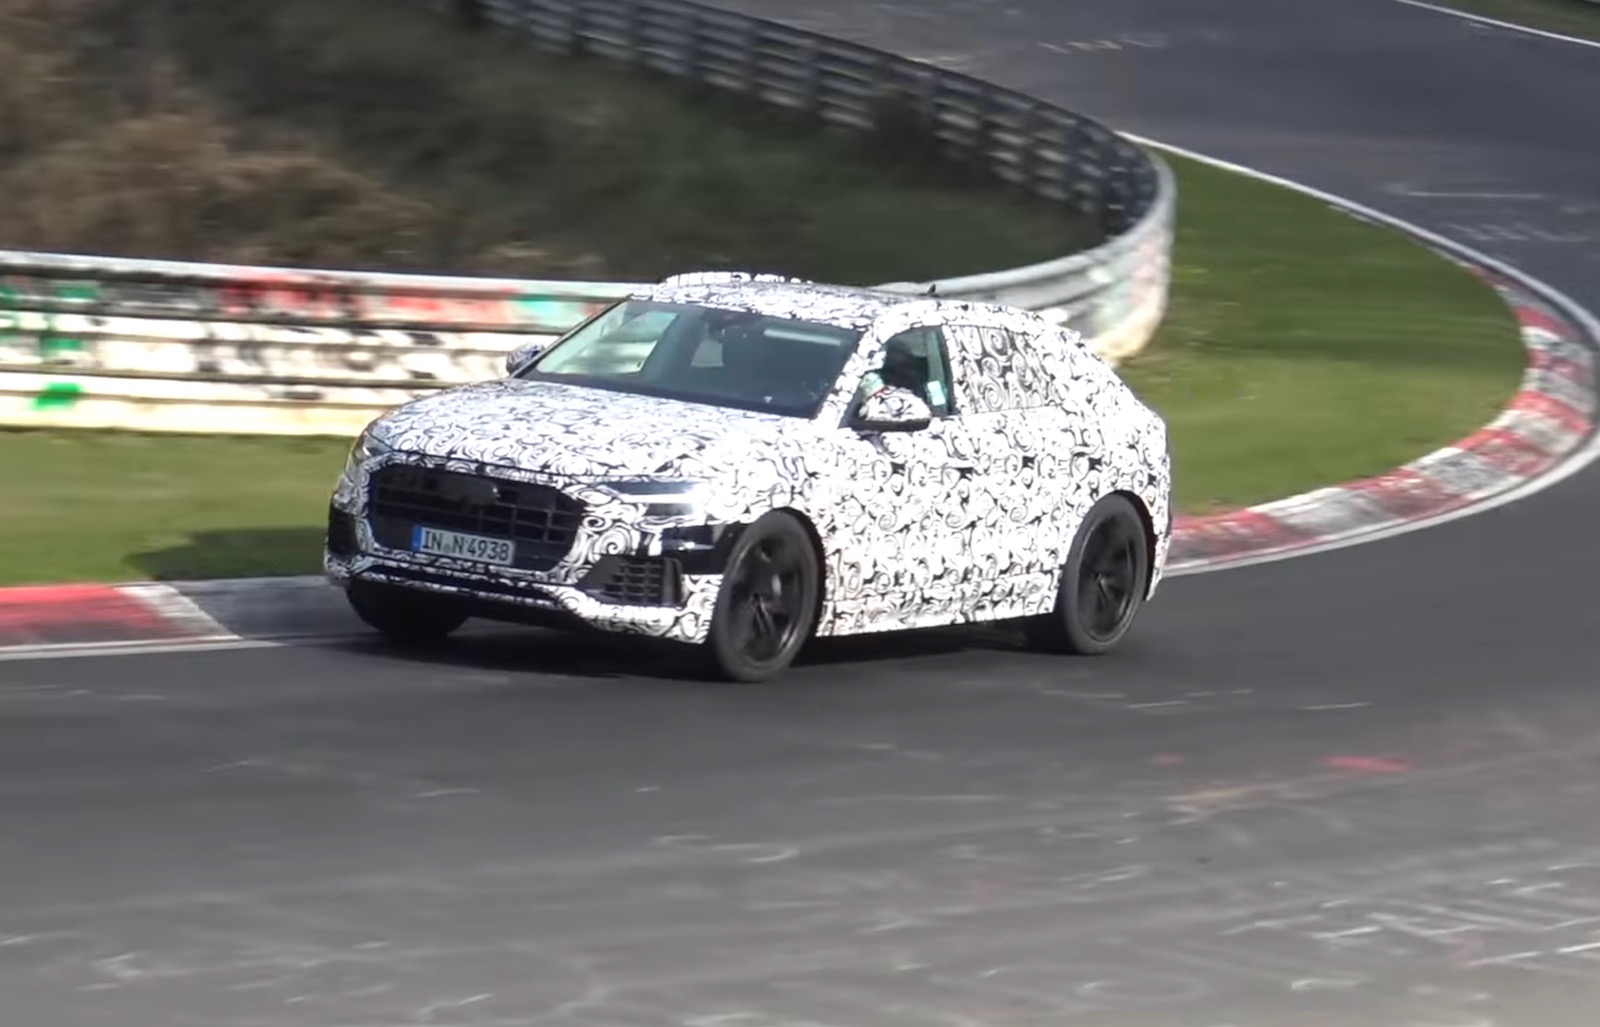 Audi Q8 prototype spotted at Nurburgring, previews sporty flagship (video)